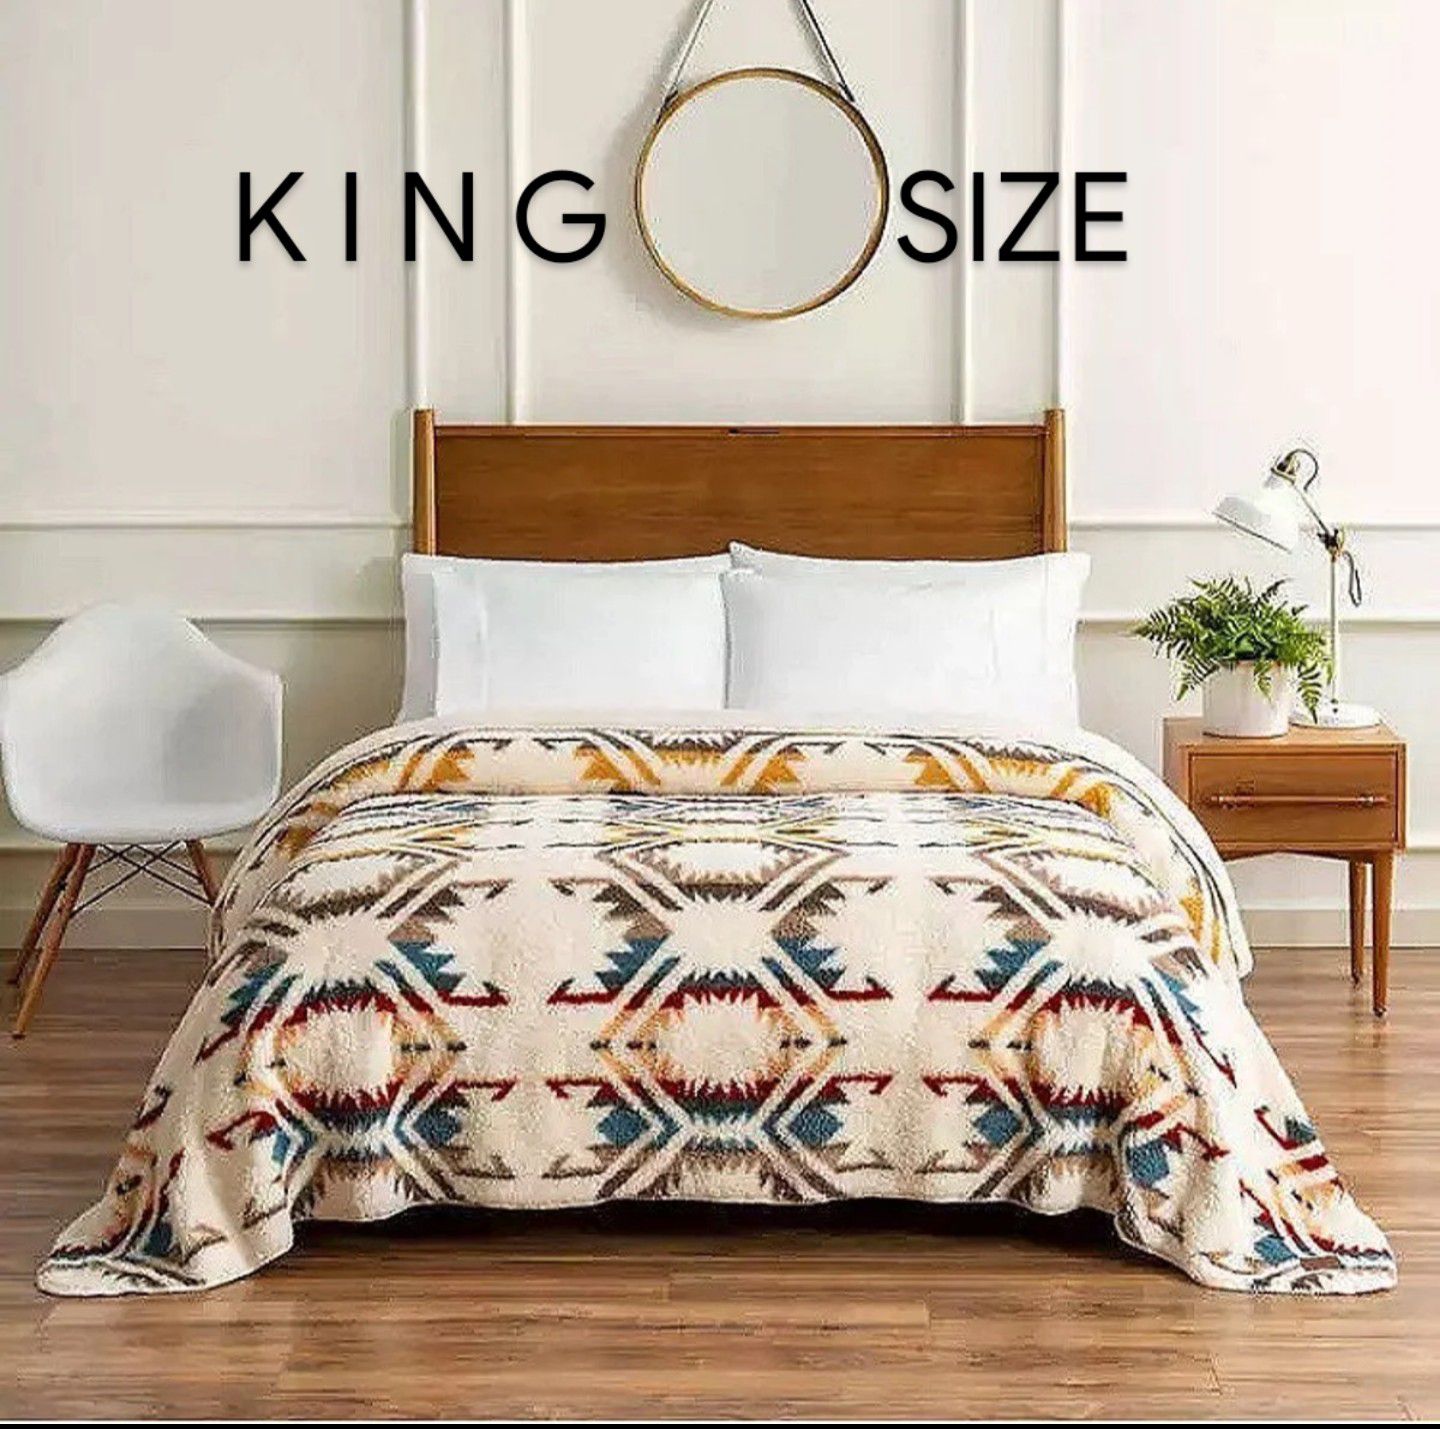 Pendleton King Size Sherpa Blanket/New Super Soft and Warm